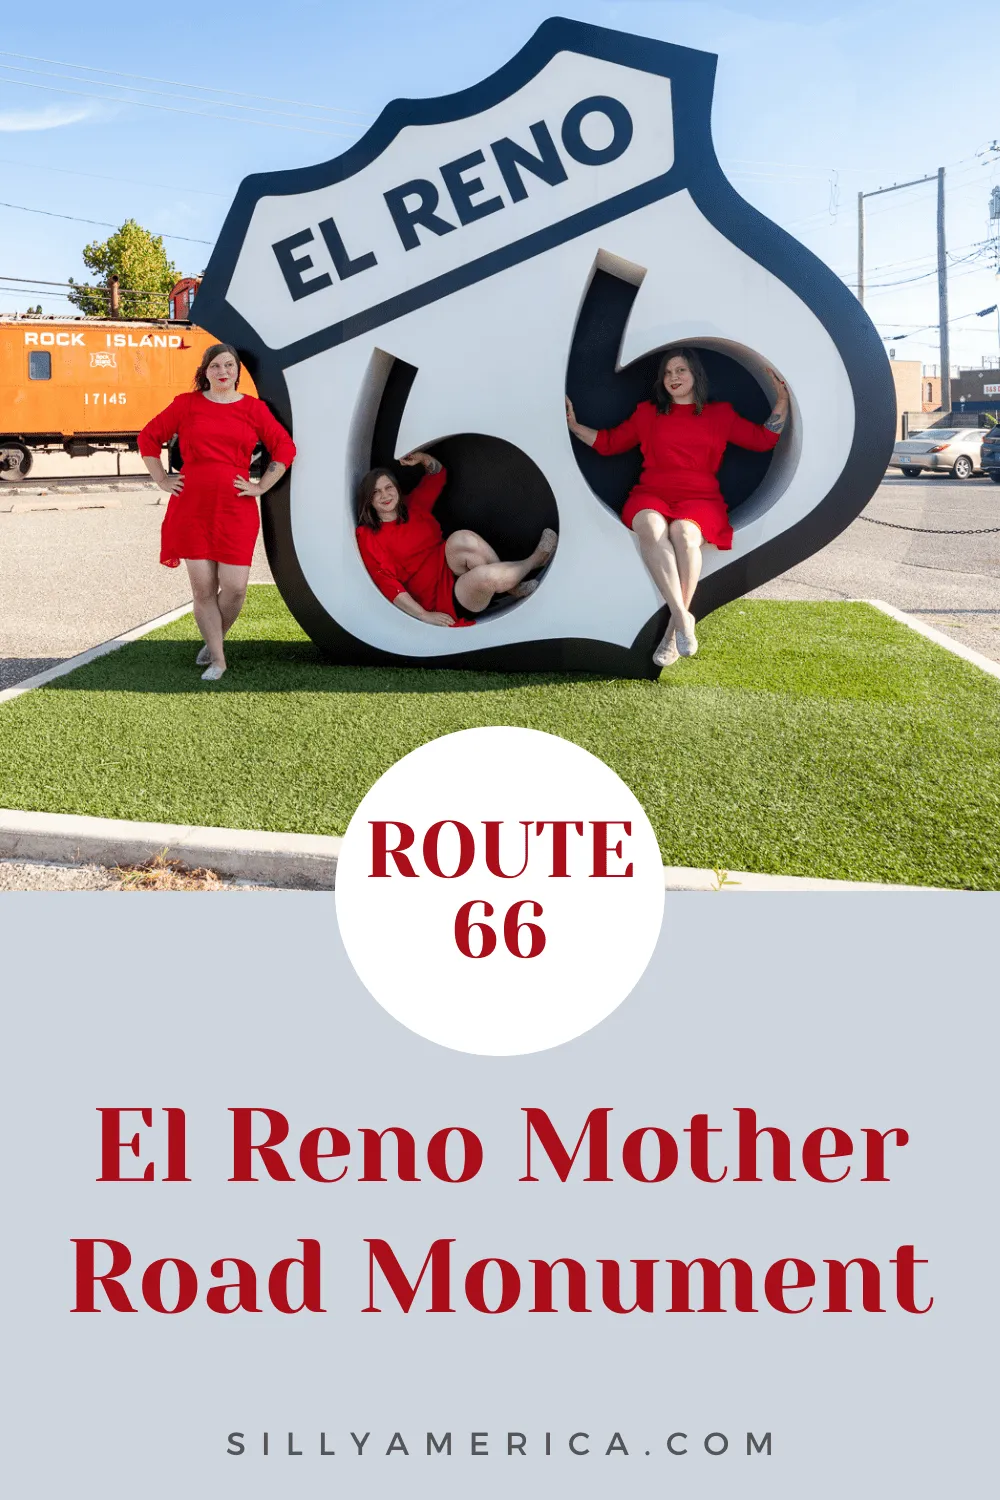 Welcome to the ultimate Route 66 selfie spot. This roadside attraction was built to capture the attention of motorists and provide an interactive background for the perfect social-friendly souvenir. Climb inside the El Reno Mother Road Monument in El Reno, Oklahoma. Stop on your Route 66 road trip!  #RoadTrips #RoadTripStop #Route66 #Route66RoadTrip #IllinoisRoute66 #Illinois #IllinoisRoadTrip #IllinoisRoadsideAttractions #RoadsideAttractions #RoadsideAttraction #RoadsideAmerica #RoadTrip